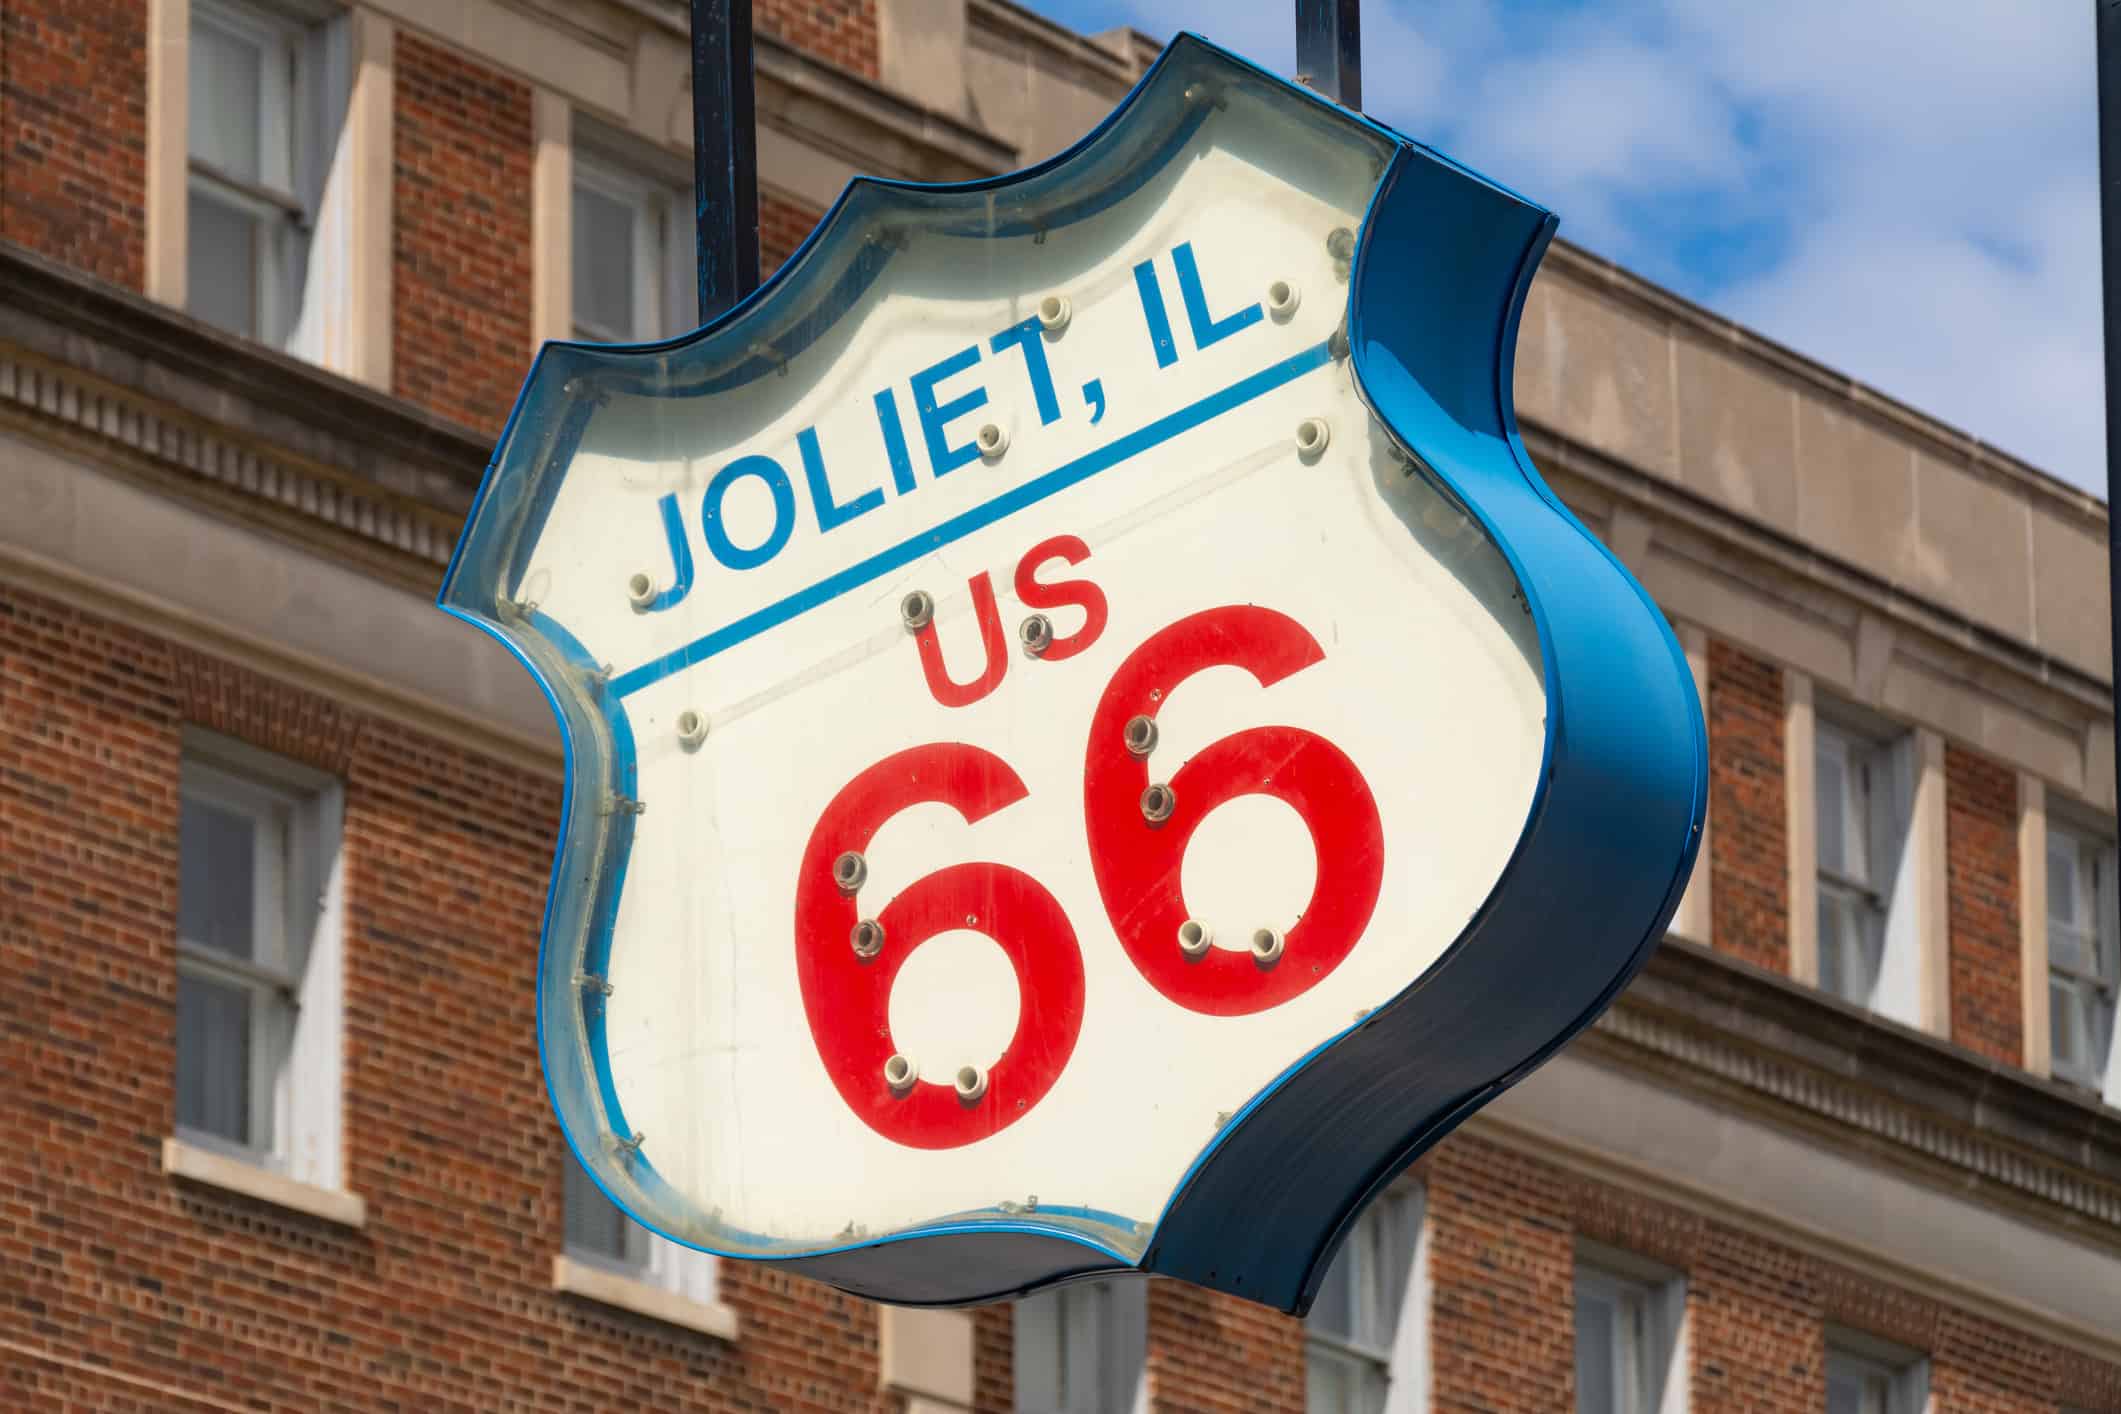 <p>One of the original stops on the historic road is Joliet. And it is still a favorite of tourists thanks to the Rialto Square Theatre, Joliet Area Historical Museum, and more.</p><p>Sharks, lions, alligators, and more! Don’t miss today’s latest and most exciting animal news. <strong><a href="https://www.msn.com/en-us/channel/source/AZ%20Animals%20US/sr-vid-7etr9q8xun6k6508c3nufaum0de3dqktiq6h27ddeagnfug30wka">Click here to access the A-Z Animals profile page</a> and be sure to hit the <em>Follow</em> button here or at the top of this article!</strong></p> <p>Have feedback? Add a comment below!</p>